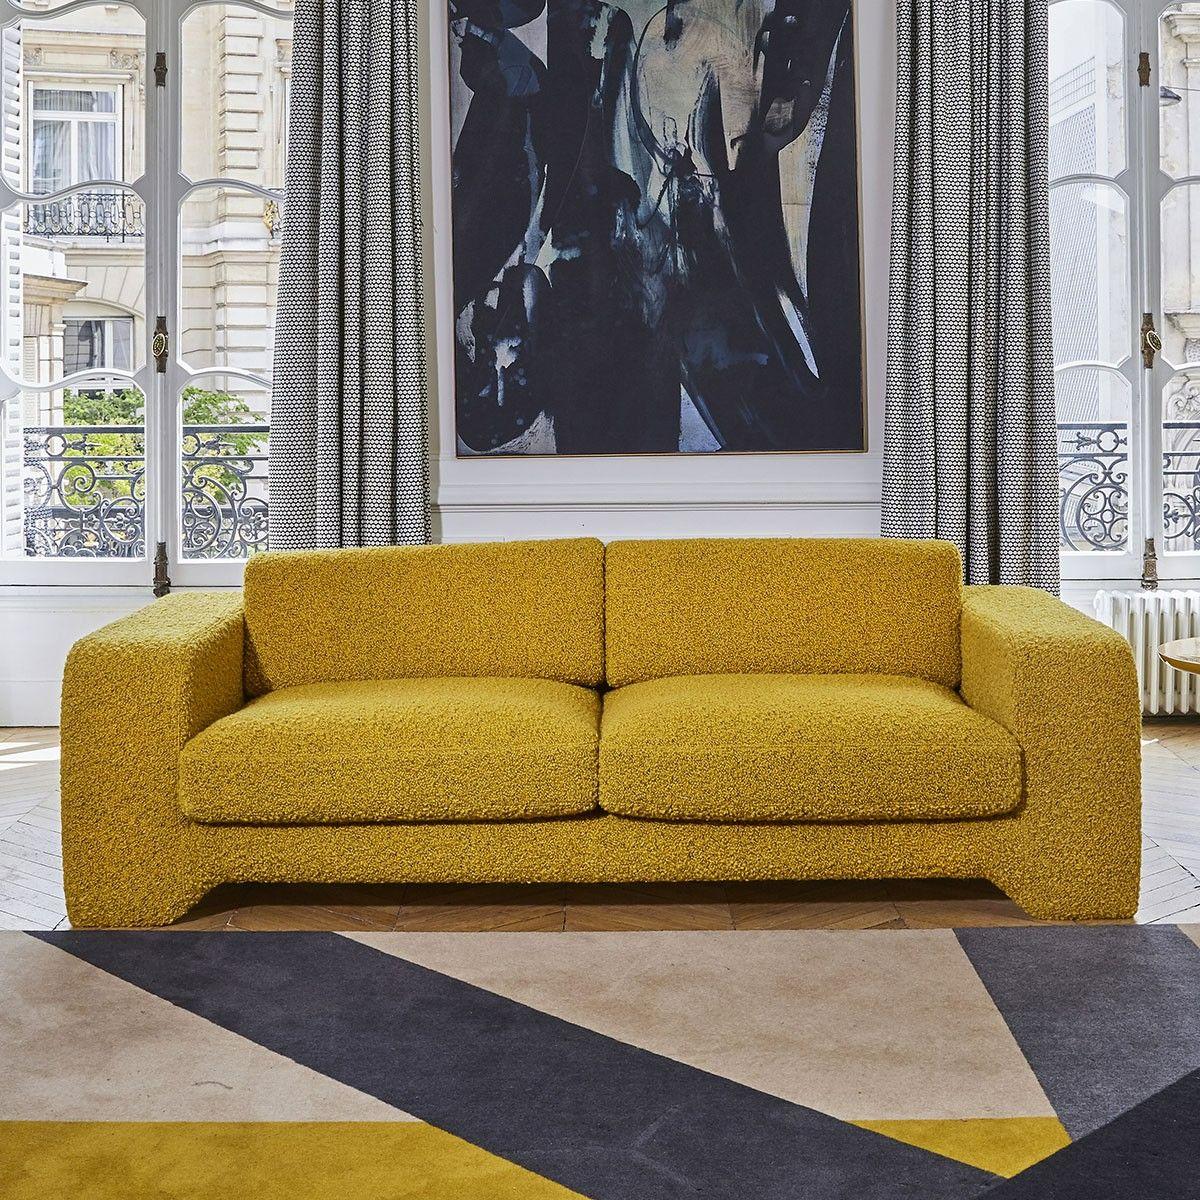 Popus Editions Giovanna 3 seater sofa in Mole Como Velvet Upholstery

Giovanna is a sofa with a strong profile. A sober, plush line, with this famous detail that changes everything, so as not to forget its strength of character and this charming